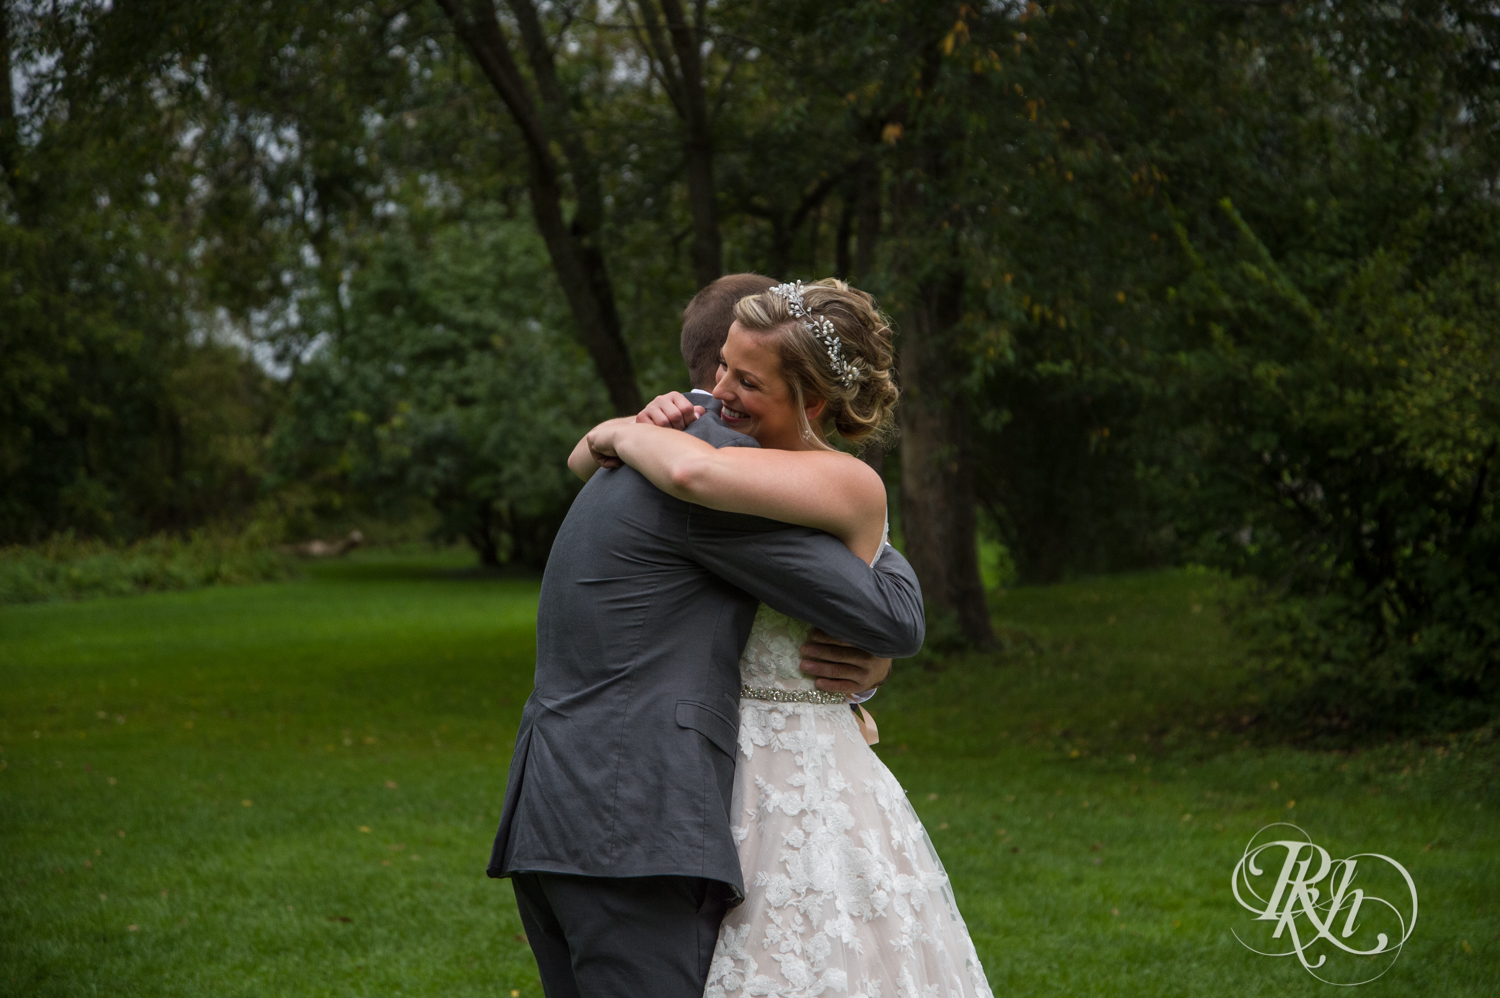 Bride and groom share first look at Camrose Hill Flower Farm in the rain in Stillwater, Minnesota.